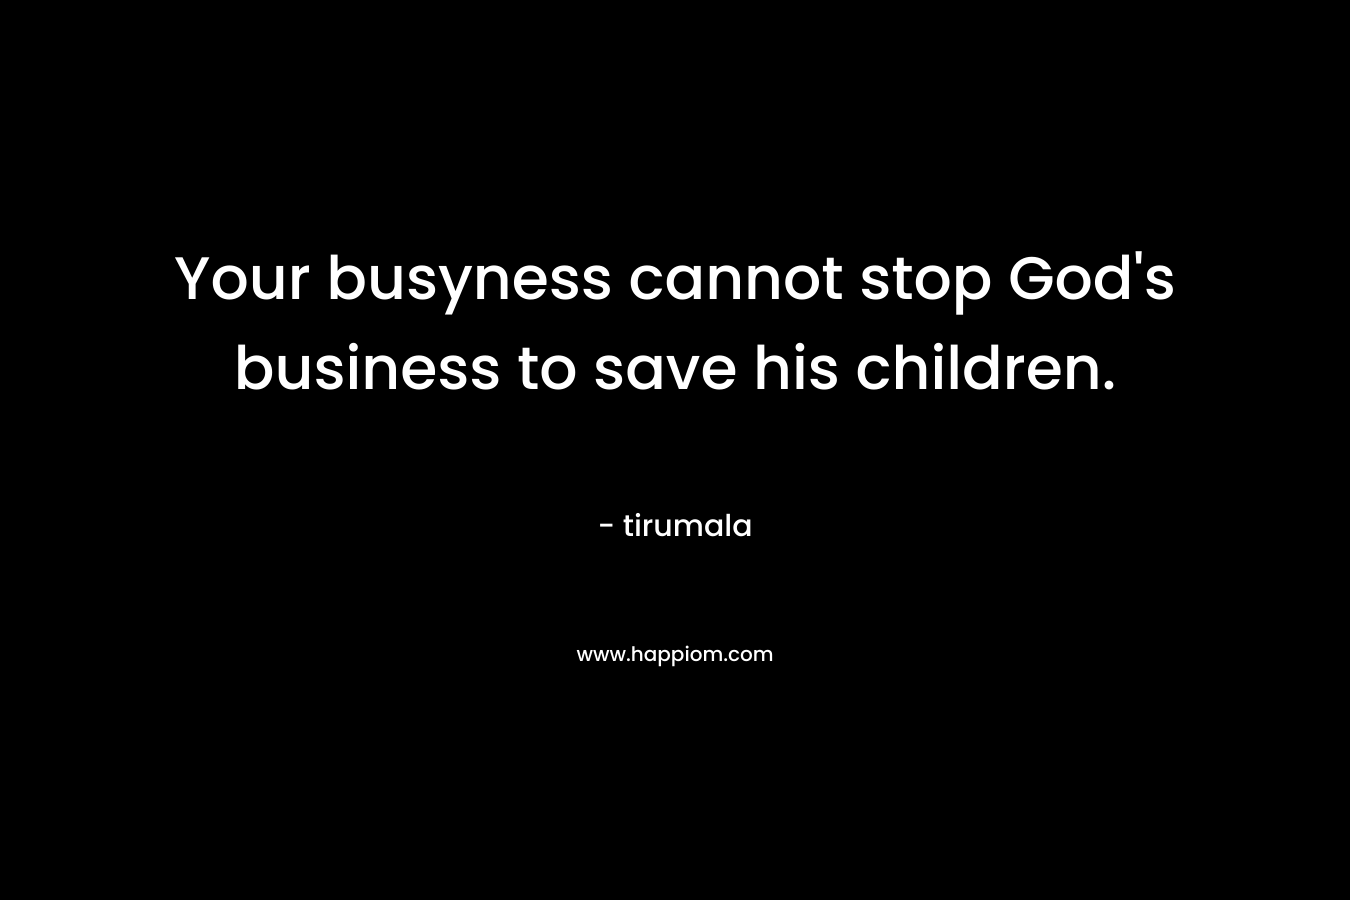 Your busyness cannot stop God's business to save his children.